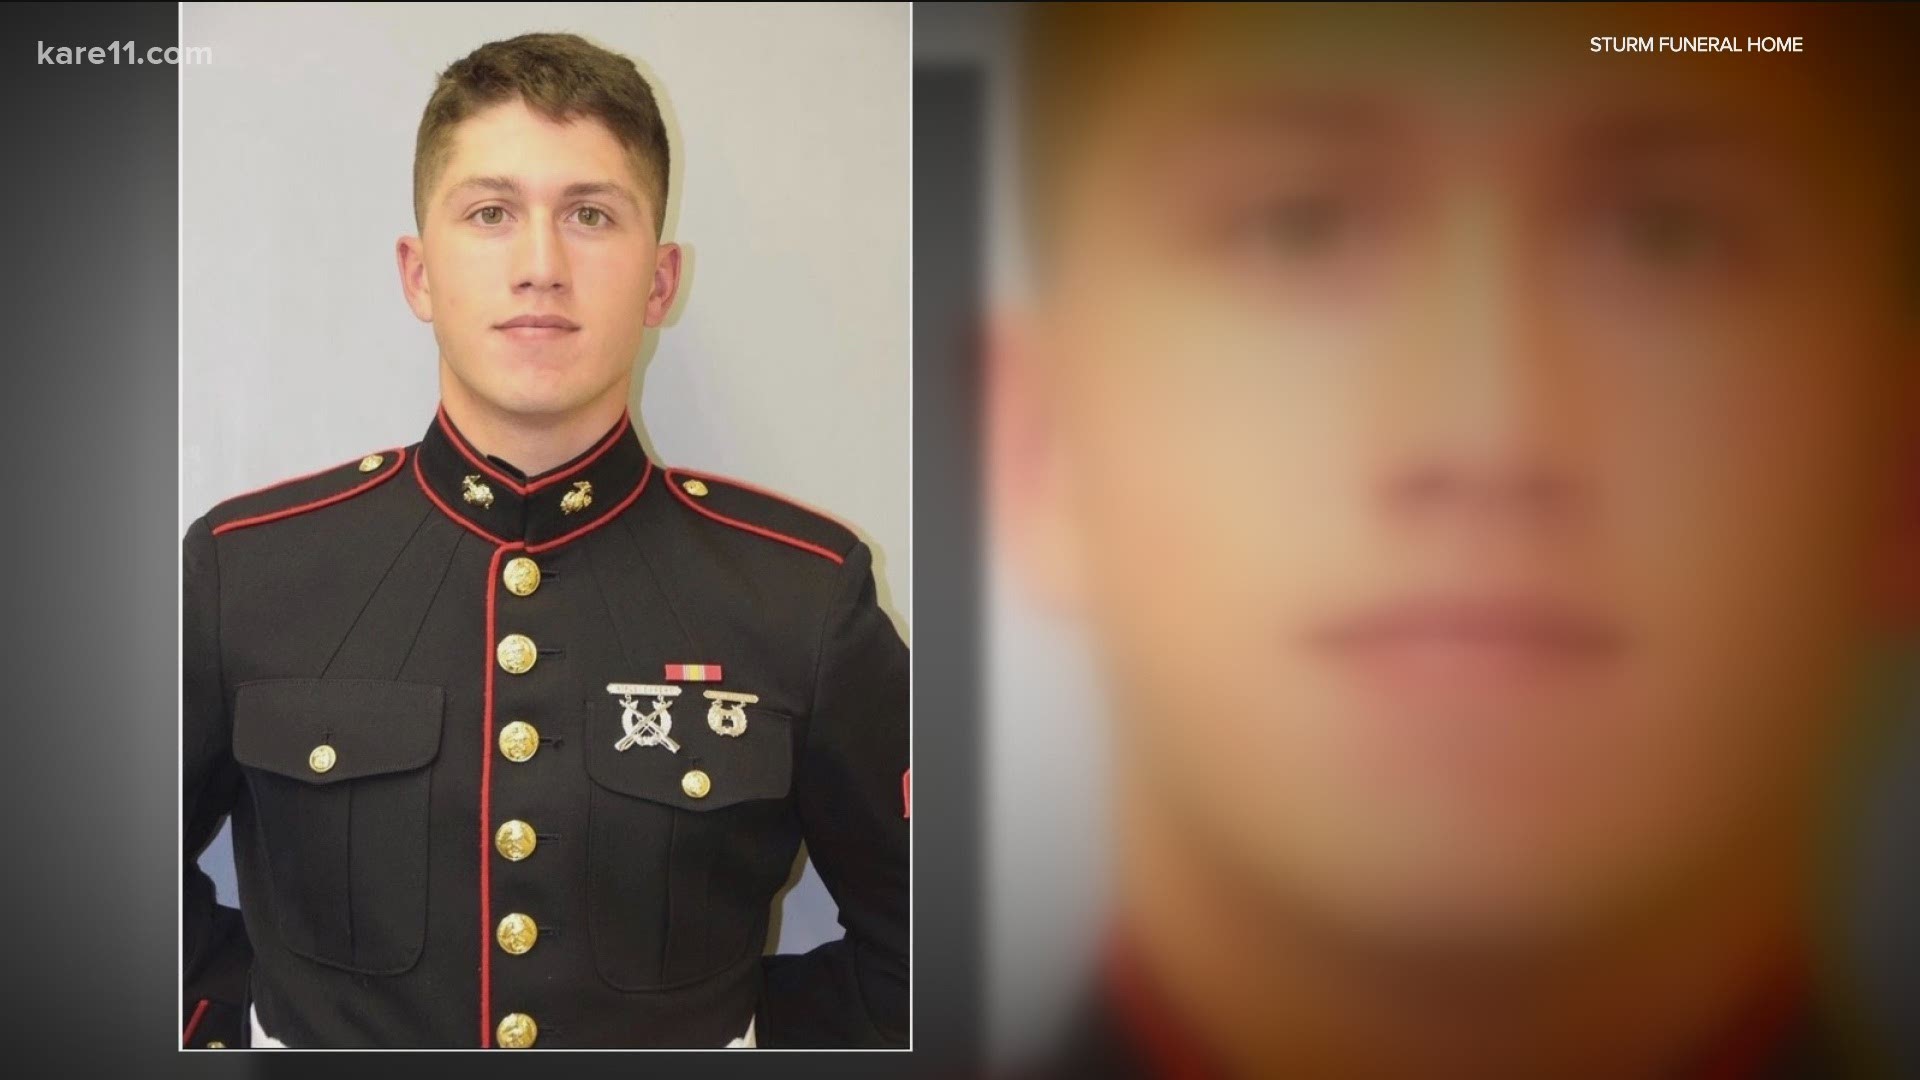 24-year-old Corporal Eric-John Niss-De Jesus drowned while off-duty, swimming off the coast of Japan while trying to save three other marines who were with him.